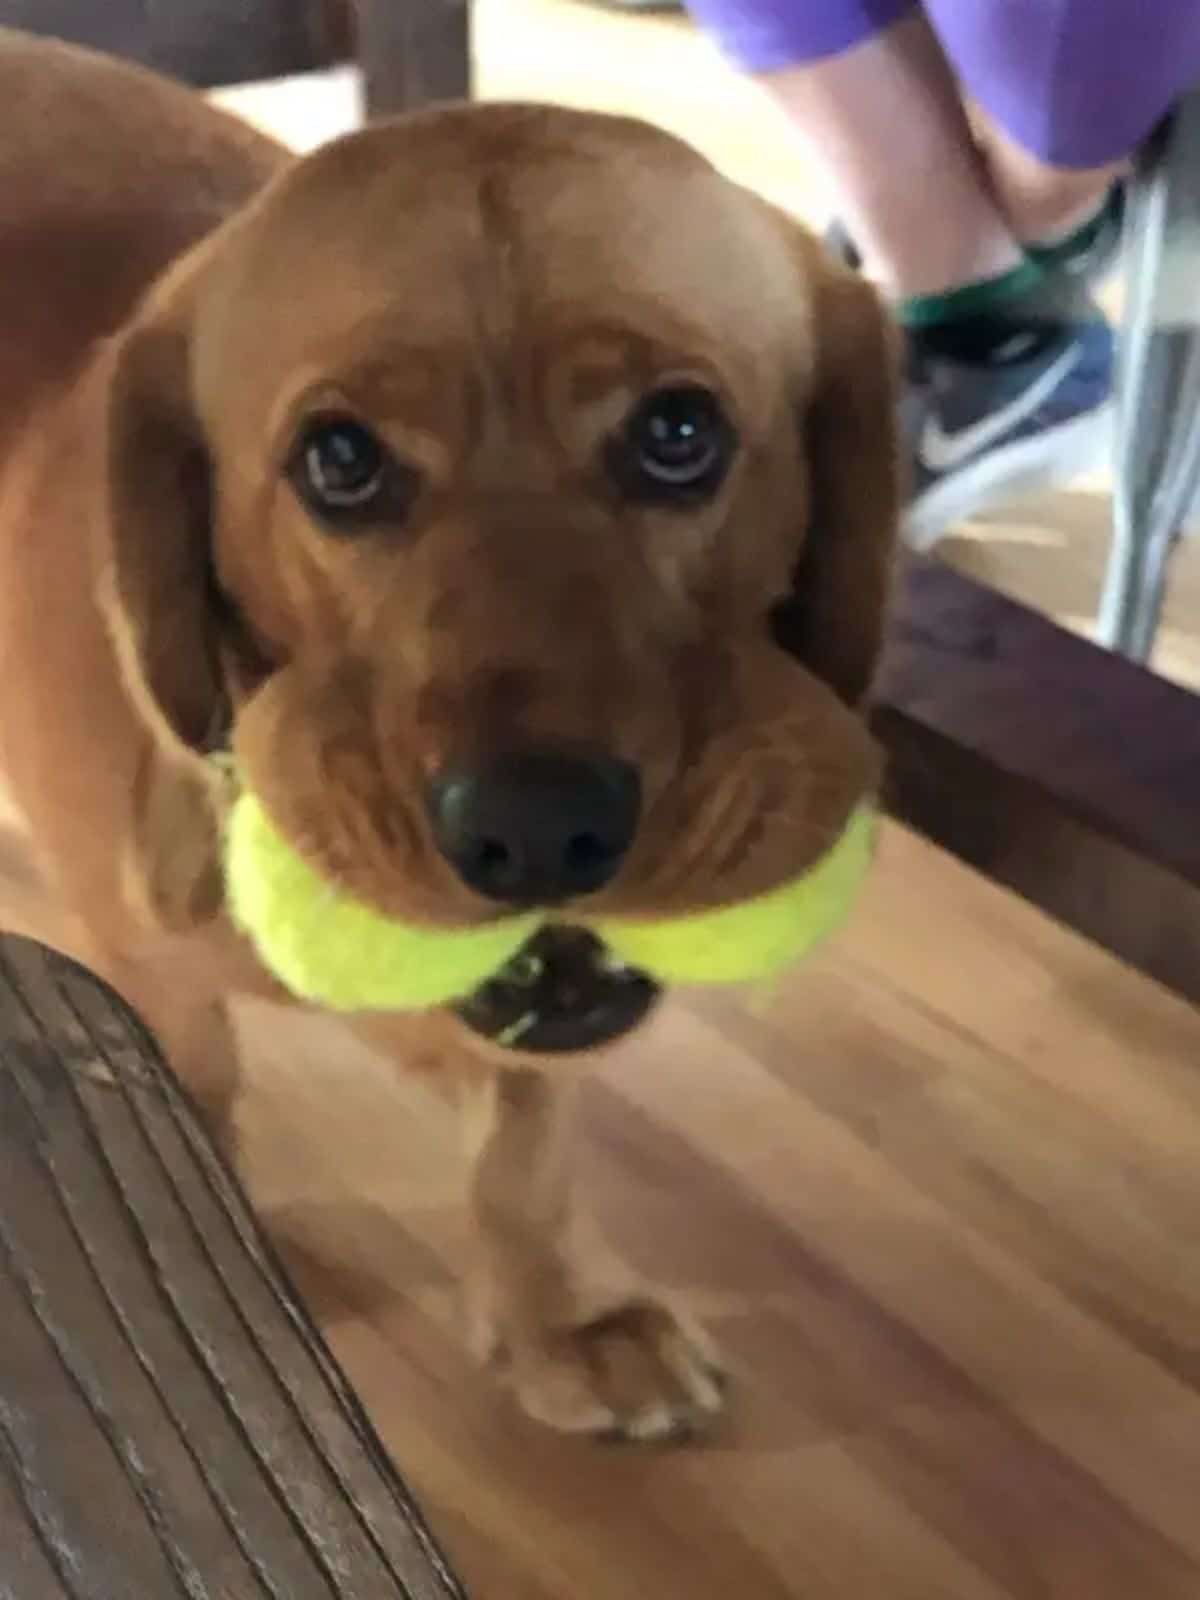 brown dog standing holding 2 yellow tennis balls in its mouth